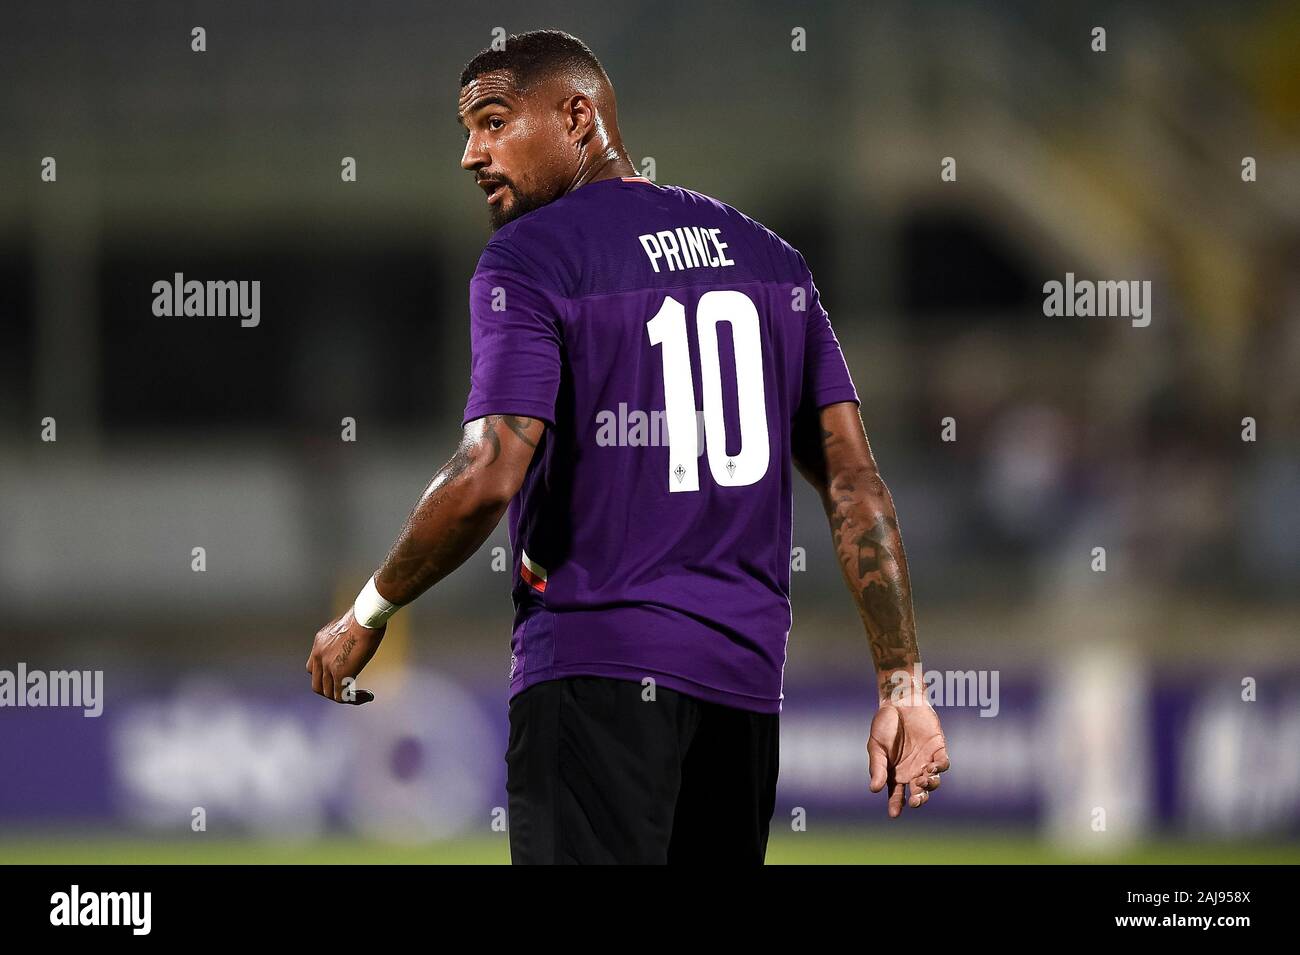 Florence, Italy. 11 August, 2019: Kevin-Prince Boateng of ACF Fiorentina looks on during the pre-season friendly football match between ACF Fiorentina and Galatasaray SK. ACF Fiorentina won 4-1 over Galatasaray SK. Credit: Nicolò Campo/Alamy Live News Stock Photo